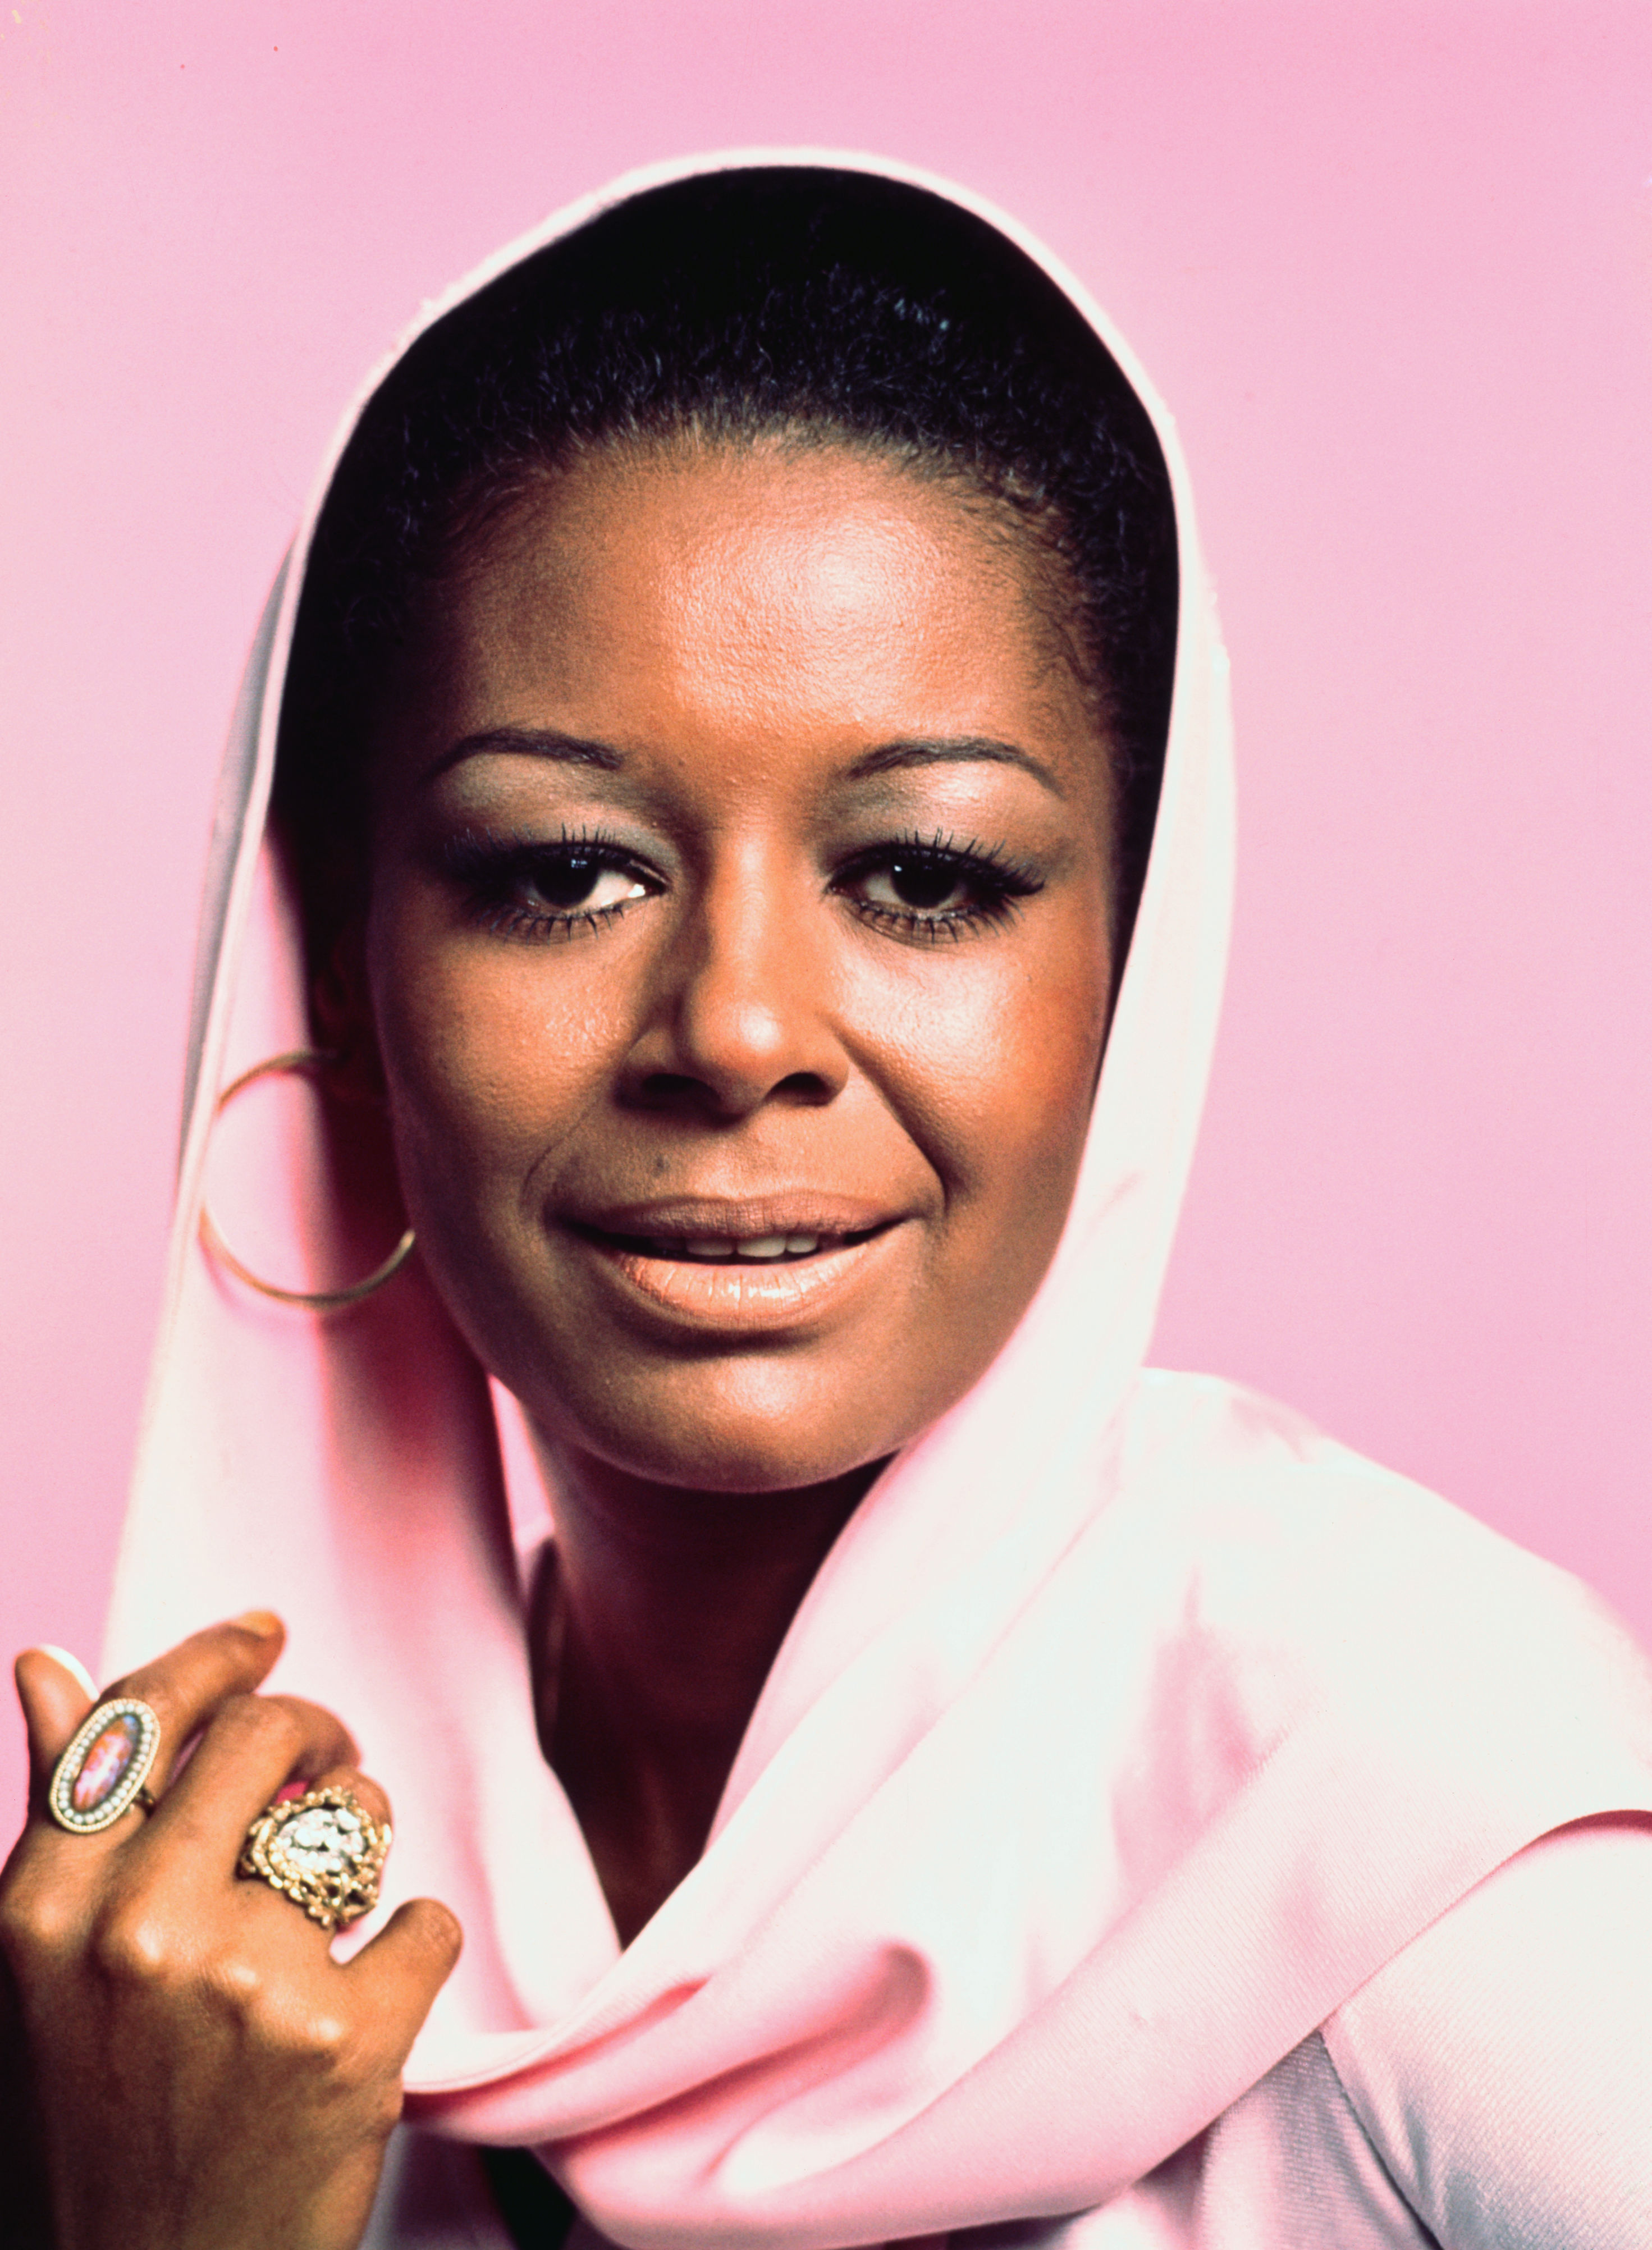 <p>Gail Fisher, who's best recognized for her role as secretary Peggy Fair on the television series "Mannix," made history with the awards she earned. For her performance on the detective series, on which she appeared from 1968 to 1975, she took home an Emmy in 1971 for outstanding performance by an actress in a dramatic supporting role -- making her the first Black woman to win the honor. One year later, she became the first Black woman to win a Golden Globe (then scored her second Globe two years later).</p>